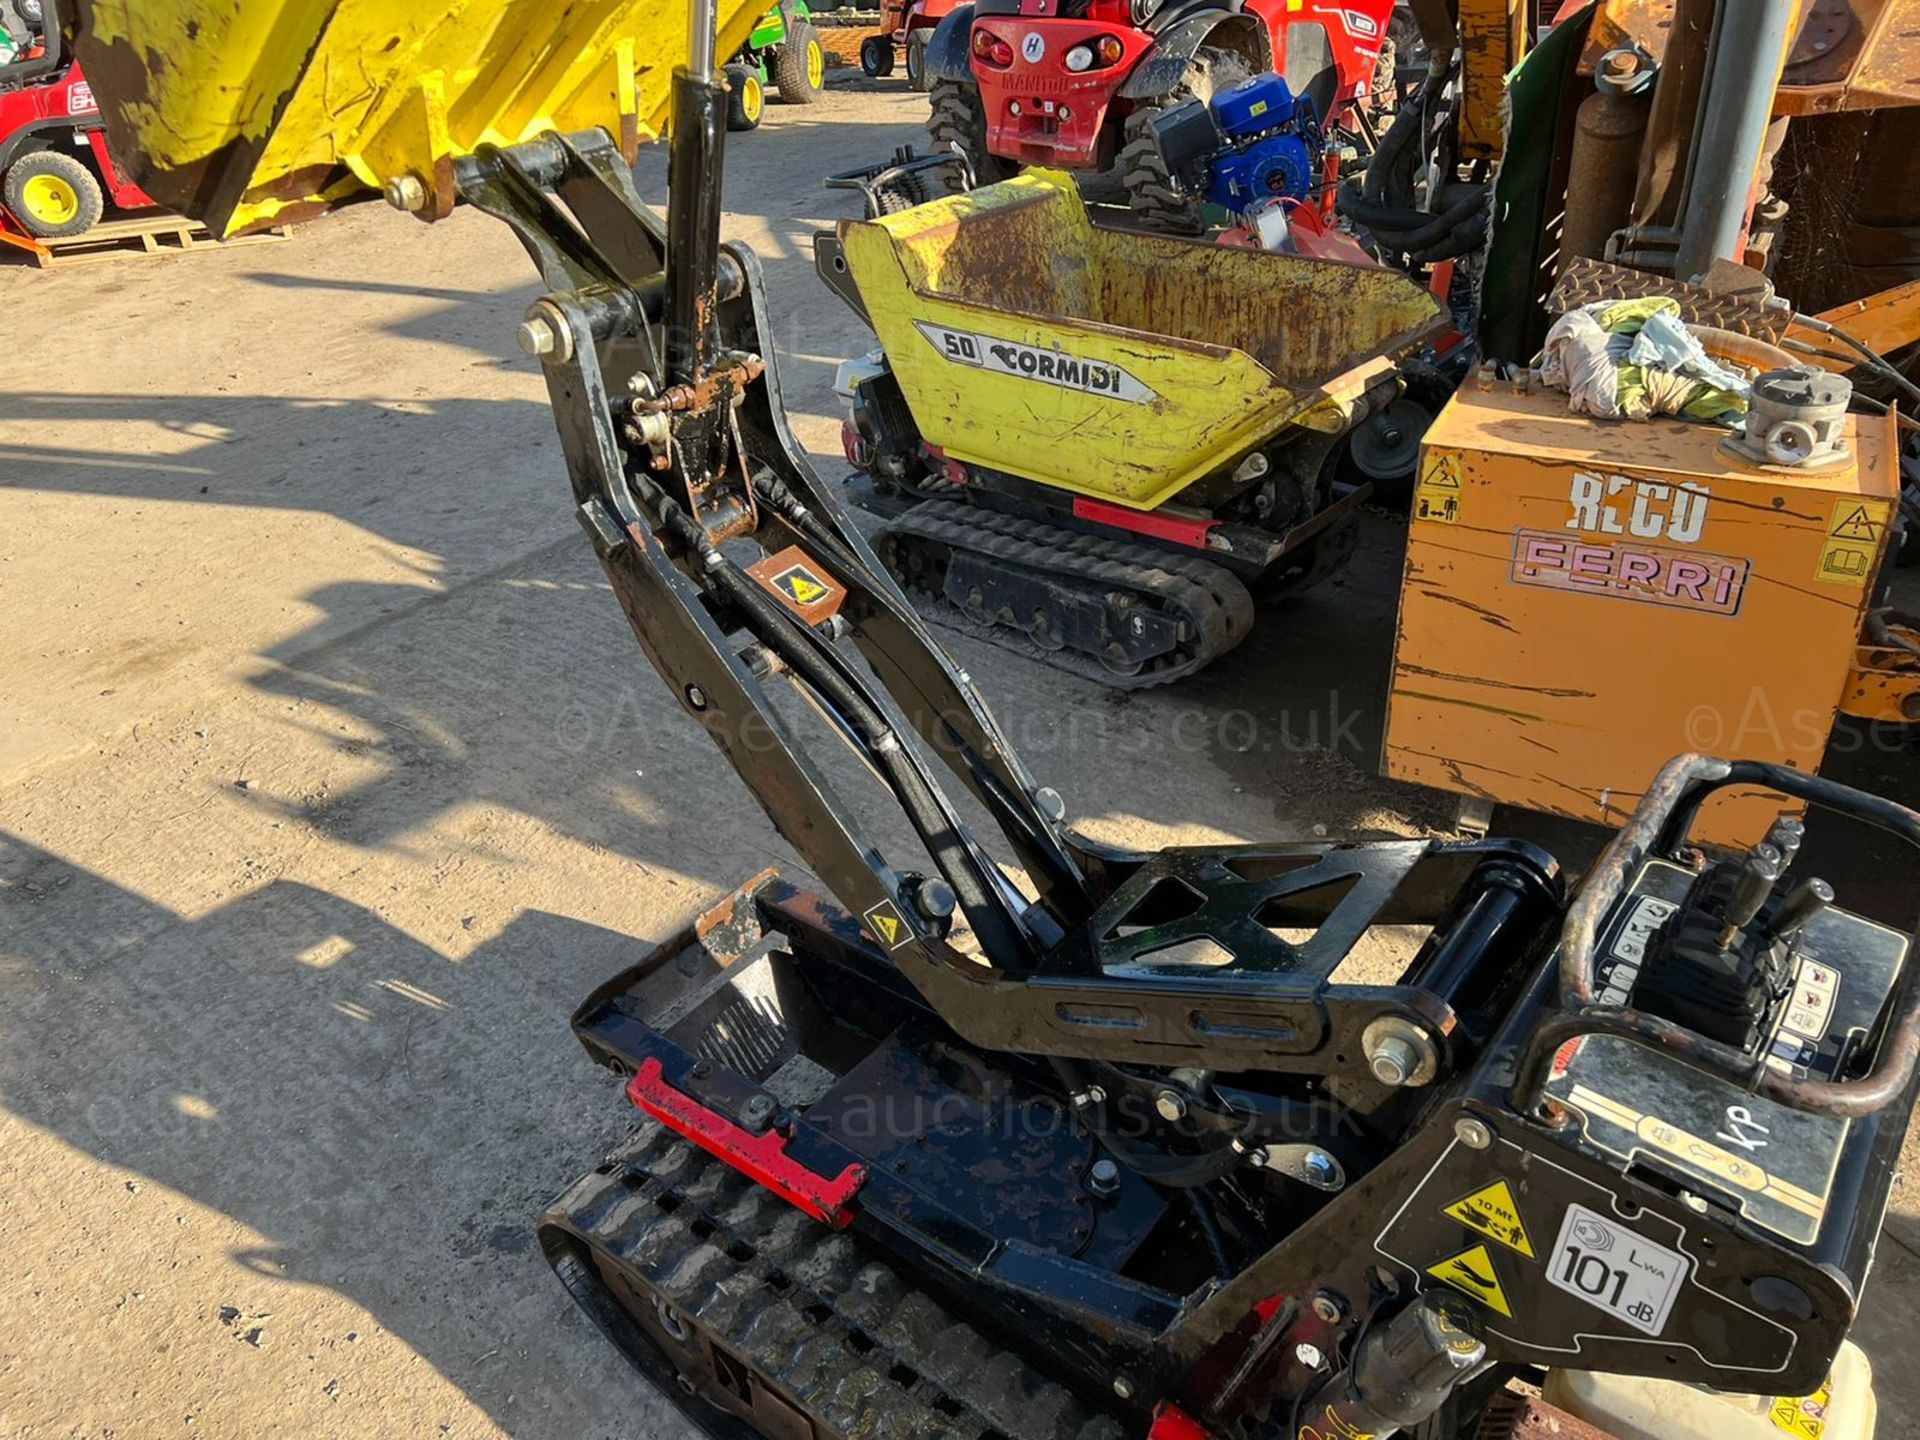 NEW AND UNUSED LM10 YELLOW AND BLACK 1 TON MINI DIGGER, RUNS DRIVES AND DIGS, 3 BUCKETS *PLUS VAT* - Image 12 of 15